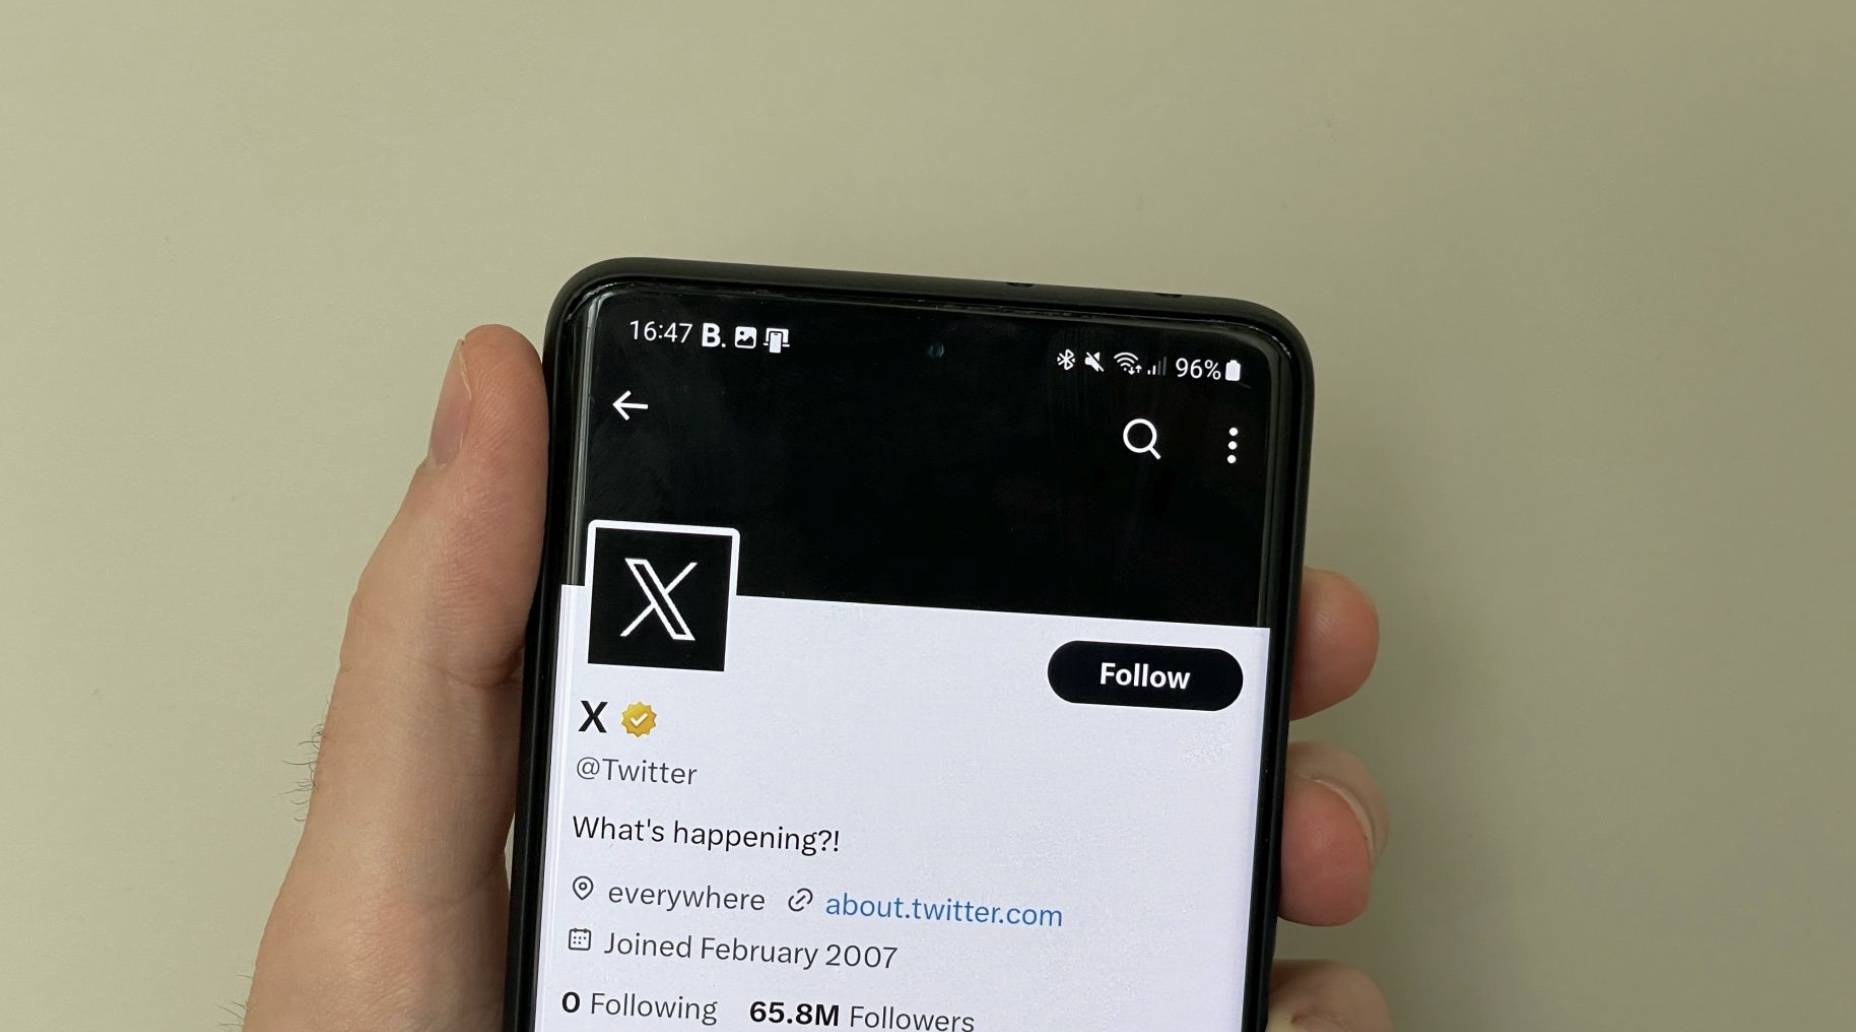 Hand holding a smartphone with Twitter's account X on the screen